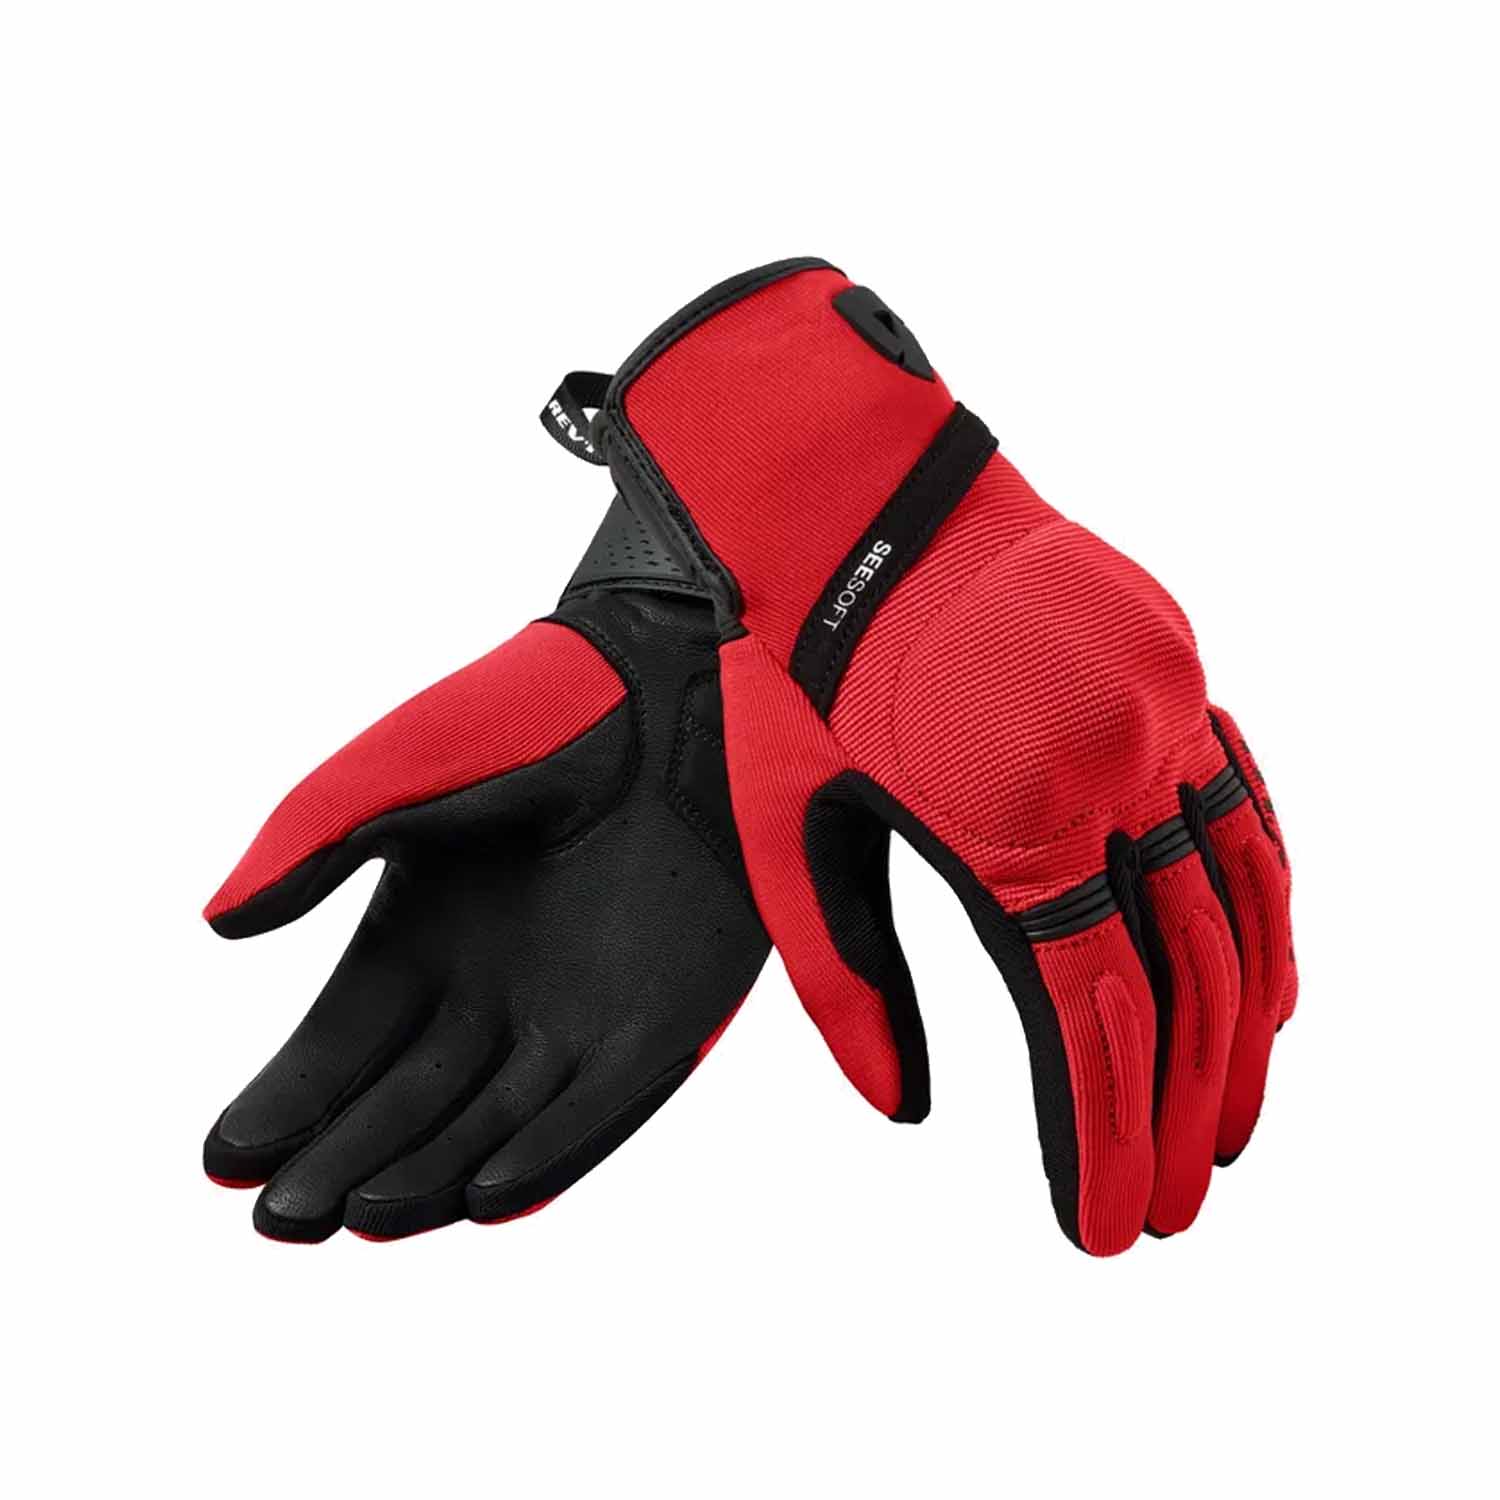 Image of REV'IT! Mosca 2 Ladies Gloves Red Black Talla XS